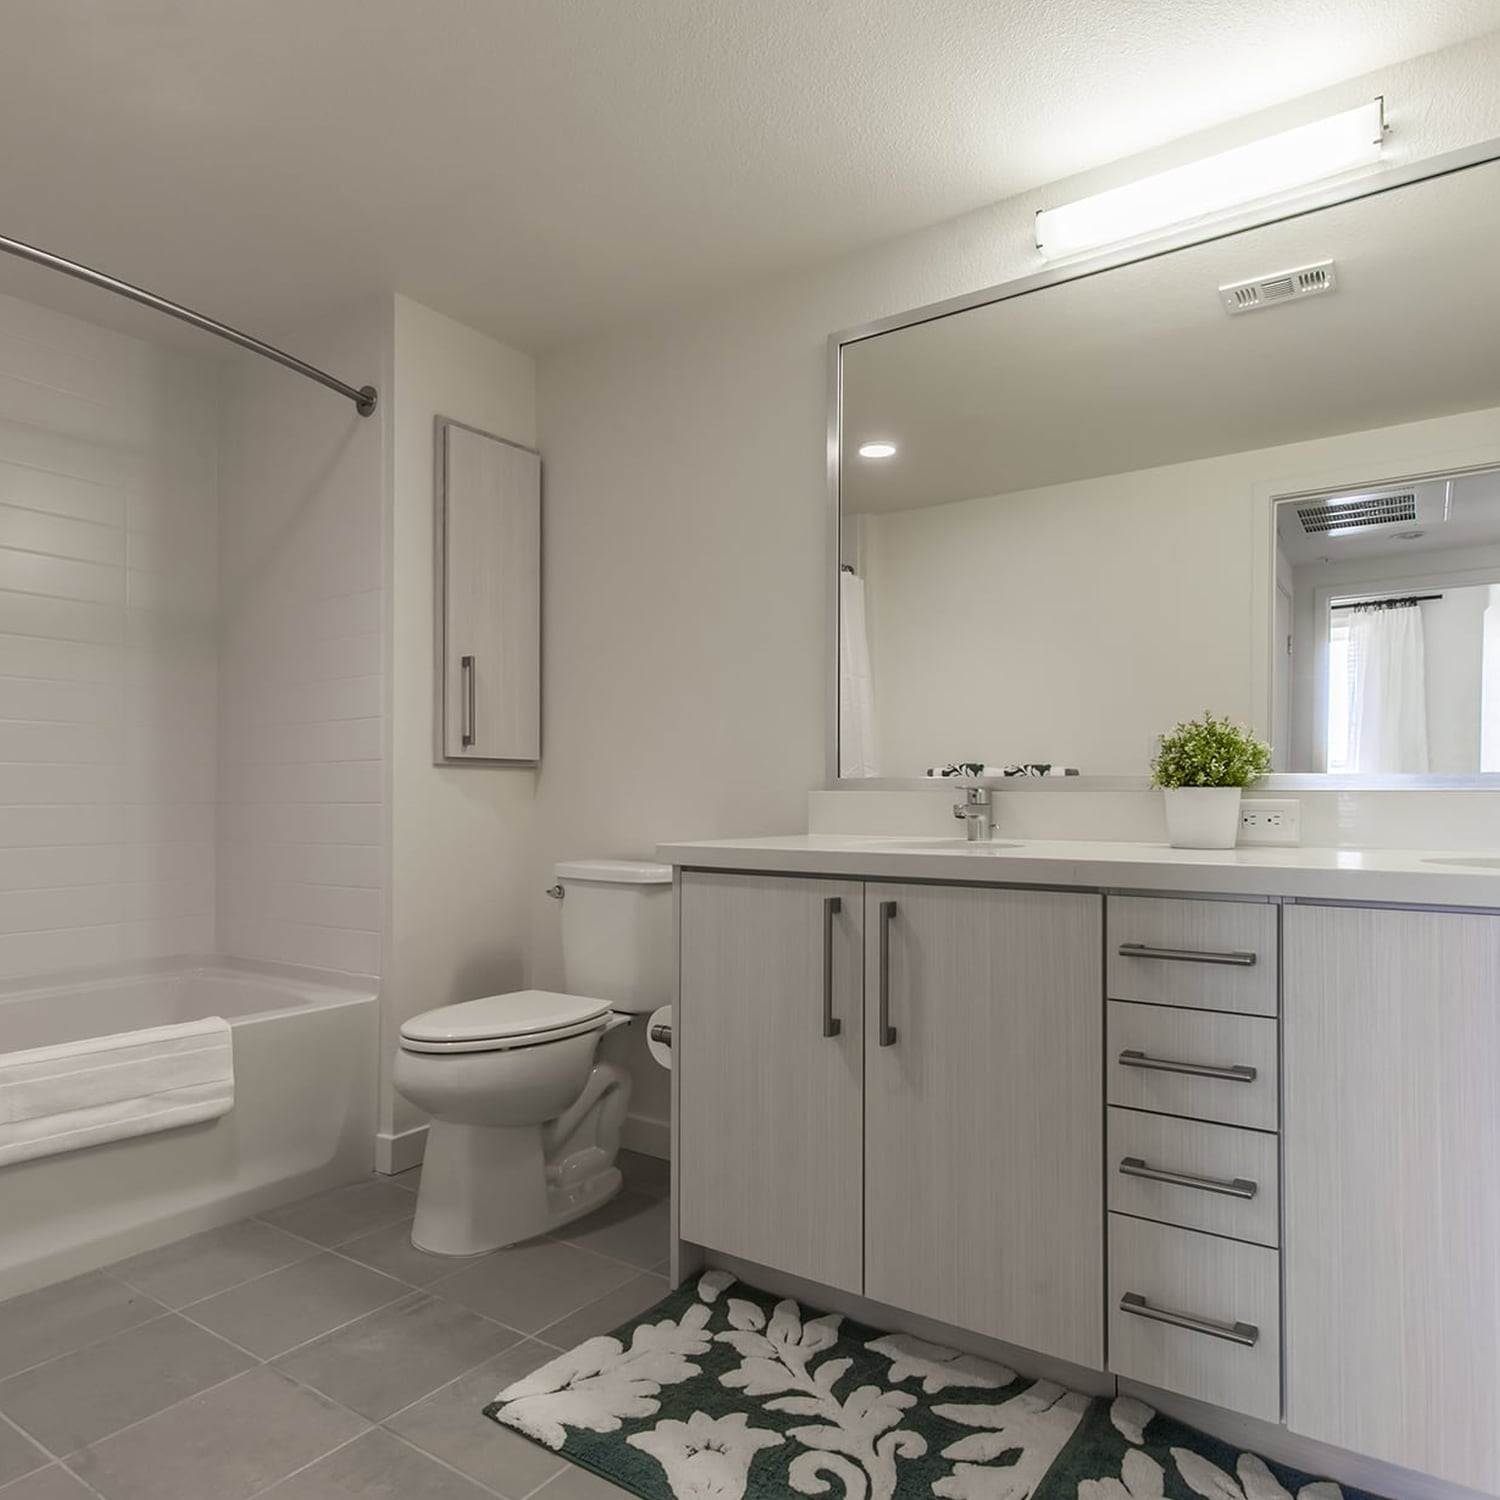 Foster City CA Apartments-One Hundred Grand Bathroom with Large Tub Area, Spacious Vanity, and Lots of Counter and Cabinet Space